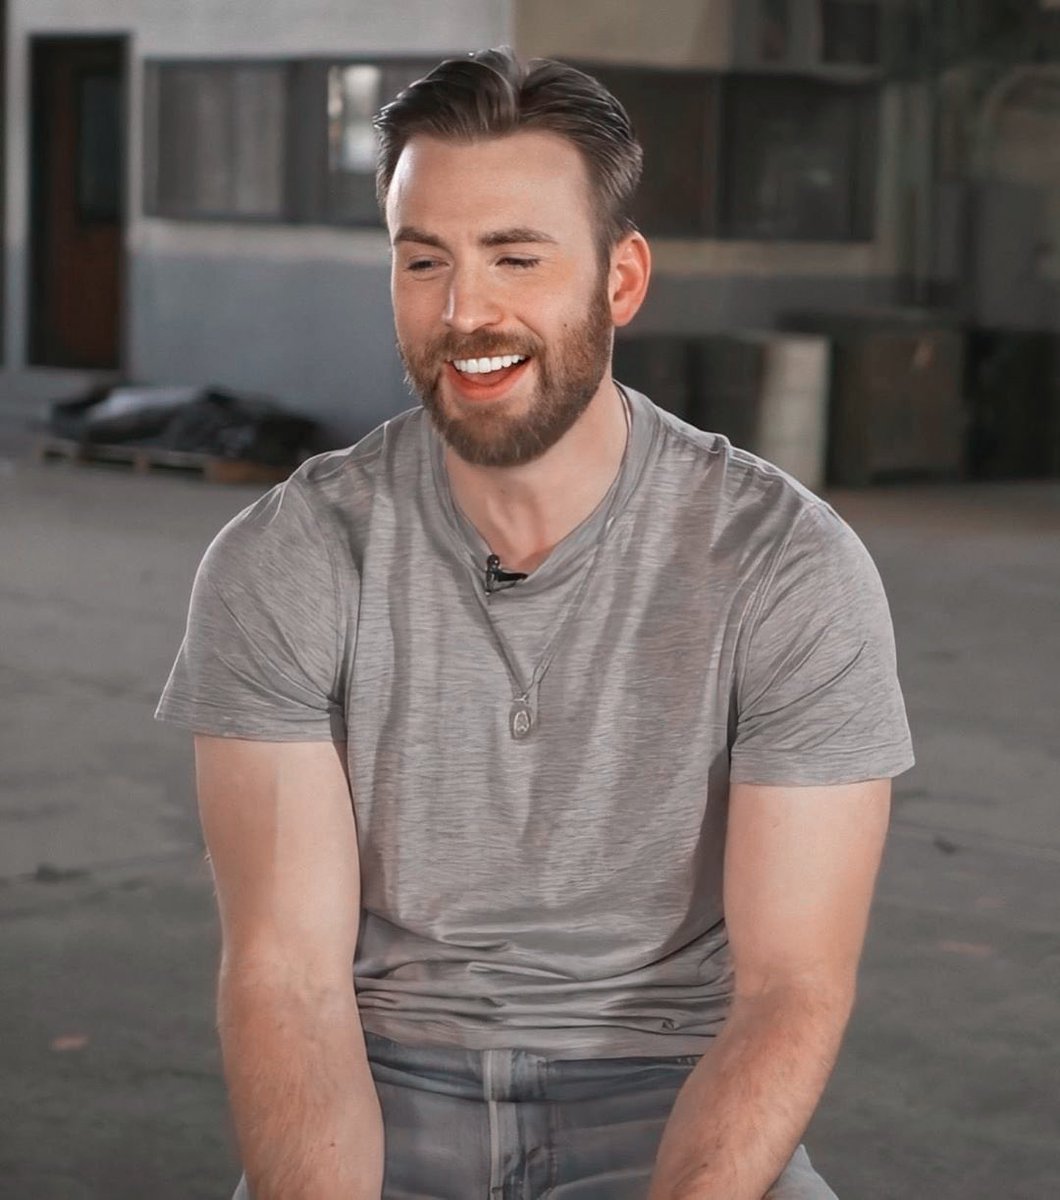 chris evans characters ranked based on how much I trust them to water my plants while I’m away a thread